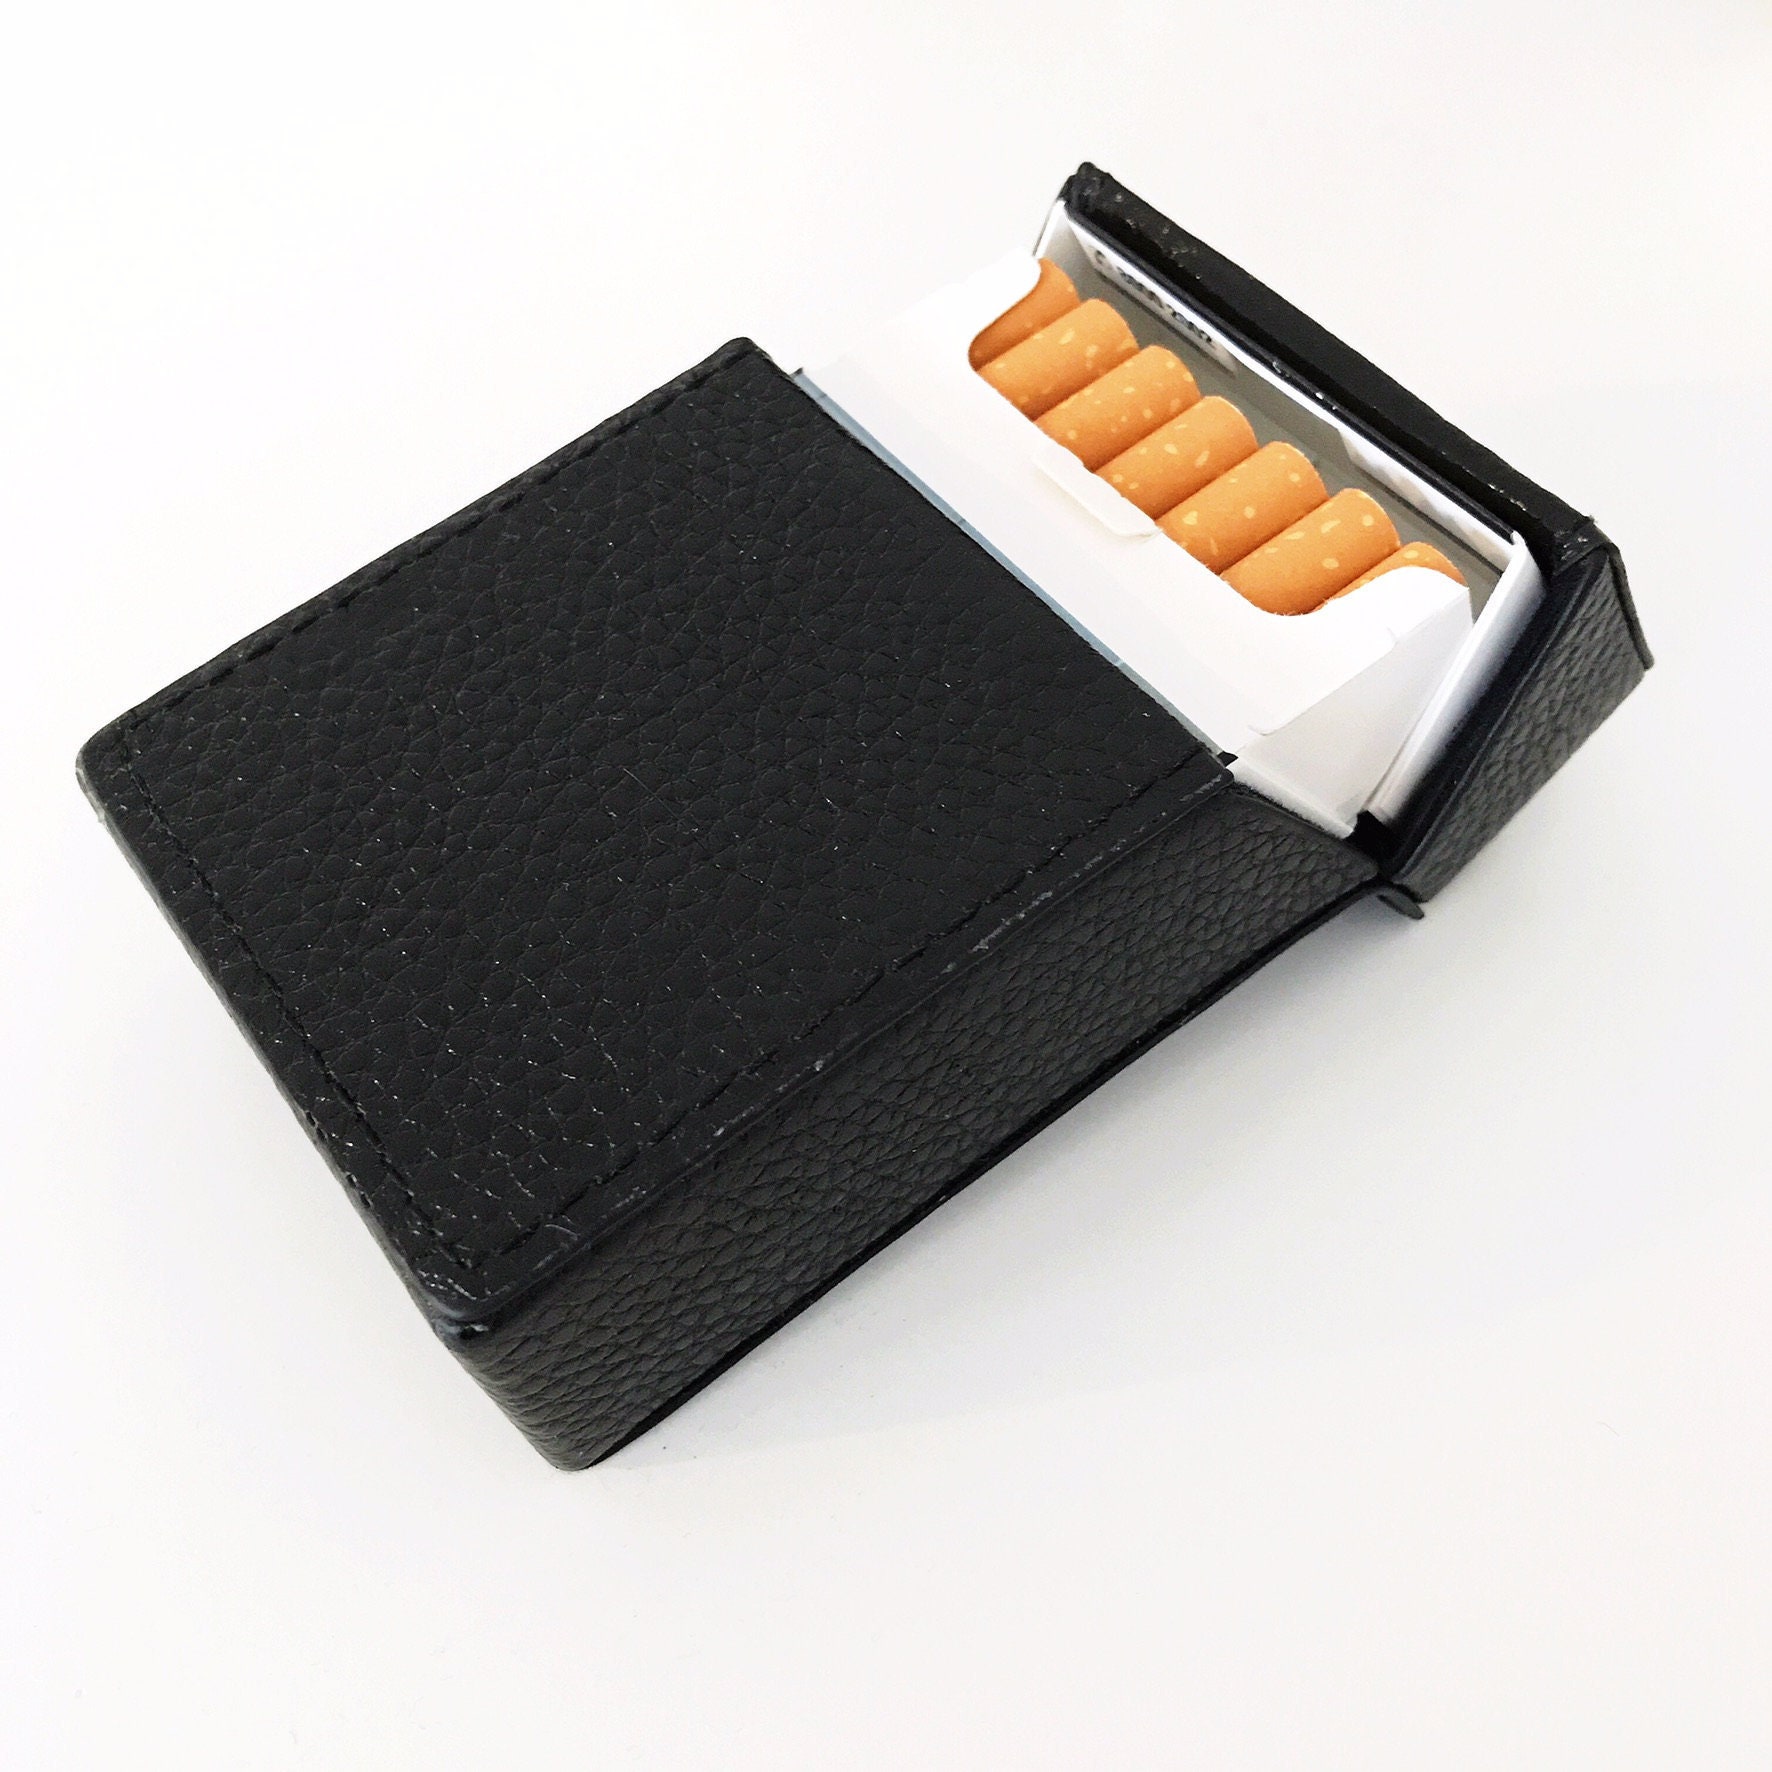 Leather Stainless Steel Cigarette Case Box - Regular Size Cigarette Pocket  Holder， One-Hand Operate Cigarette Case for Men and Women (Gray) :  Amazon.in: Clothing & Accessories